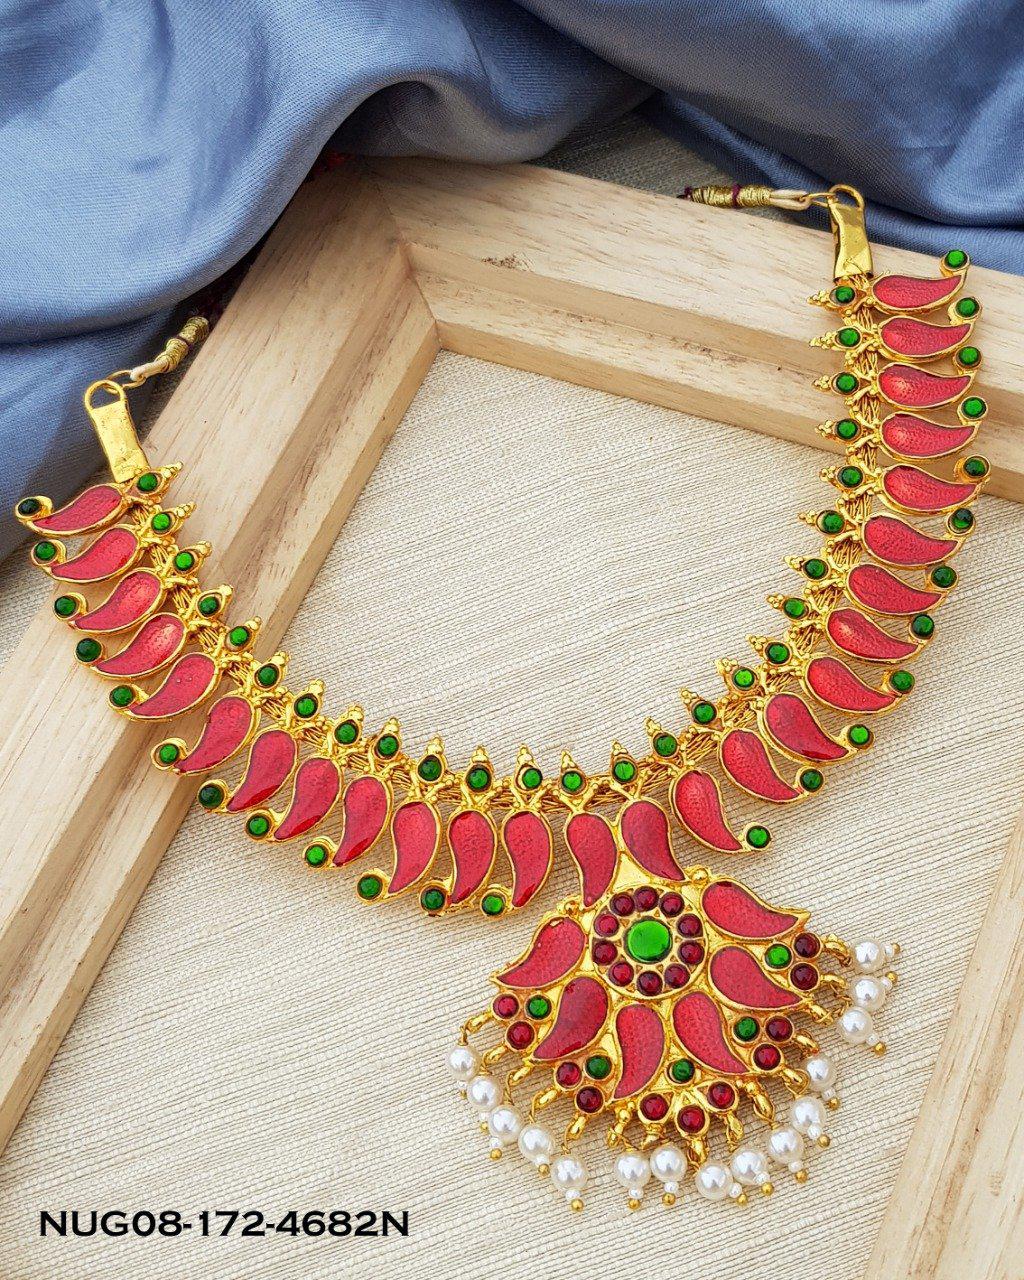 Micro Gold Plated Red Meena nagapadam necklace set suitable for Marriages Bharat Natyam and occasions 4682N